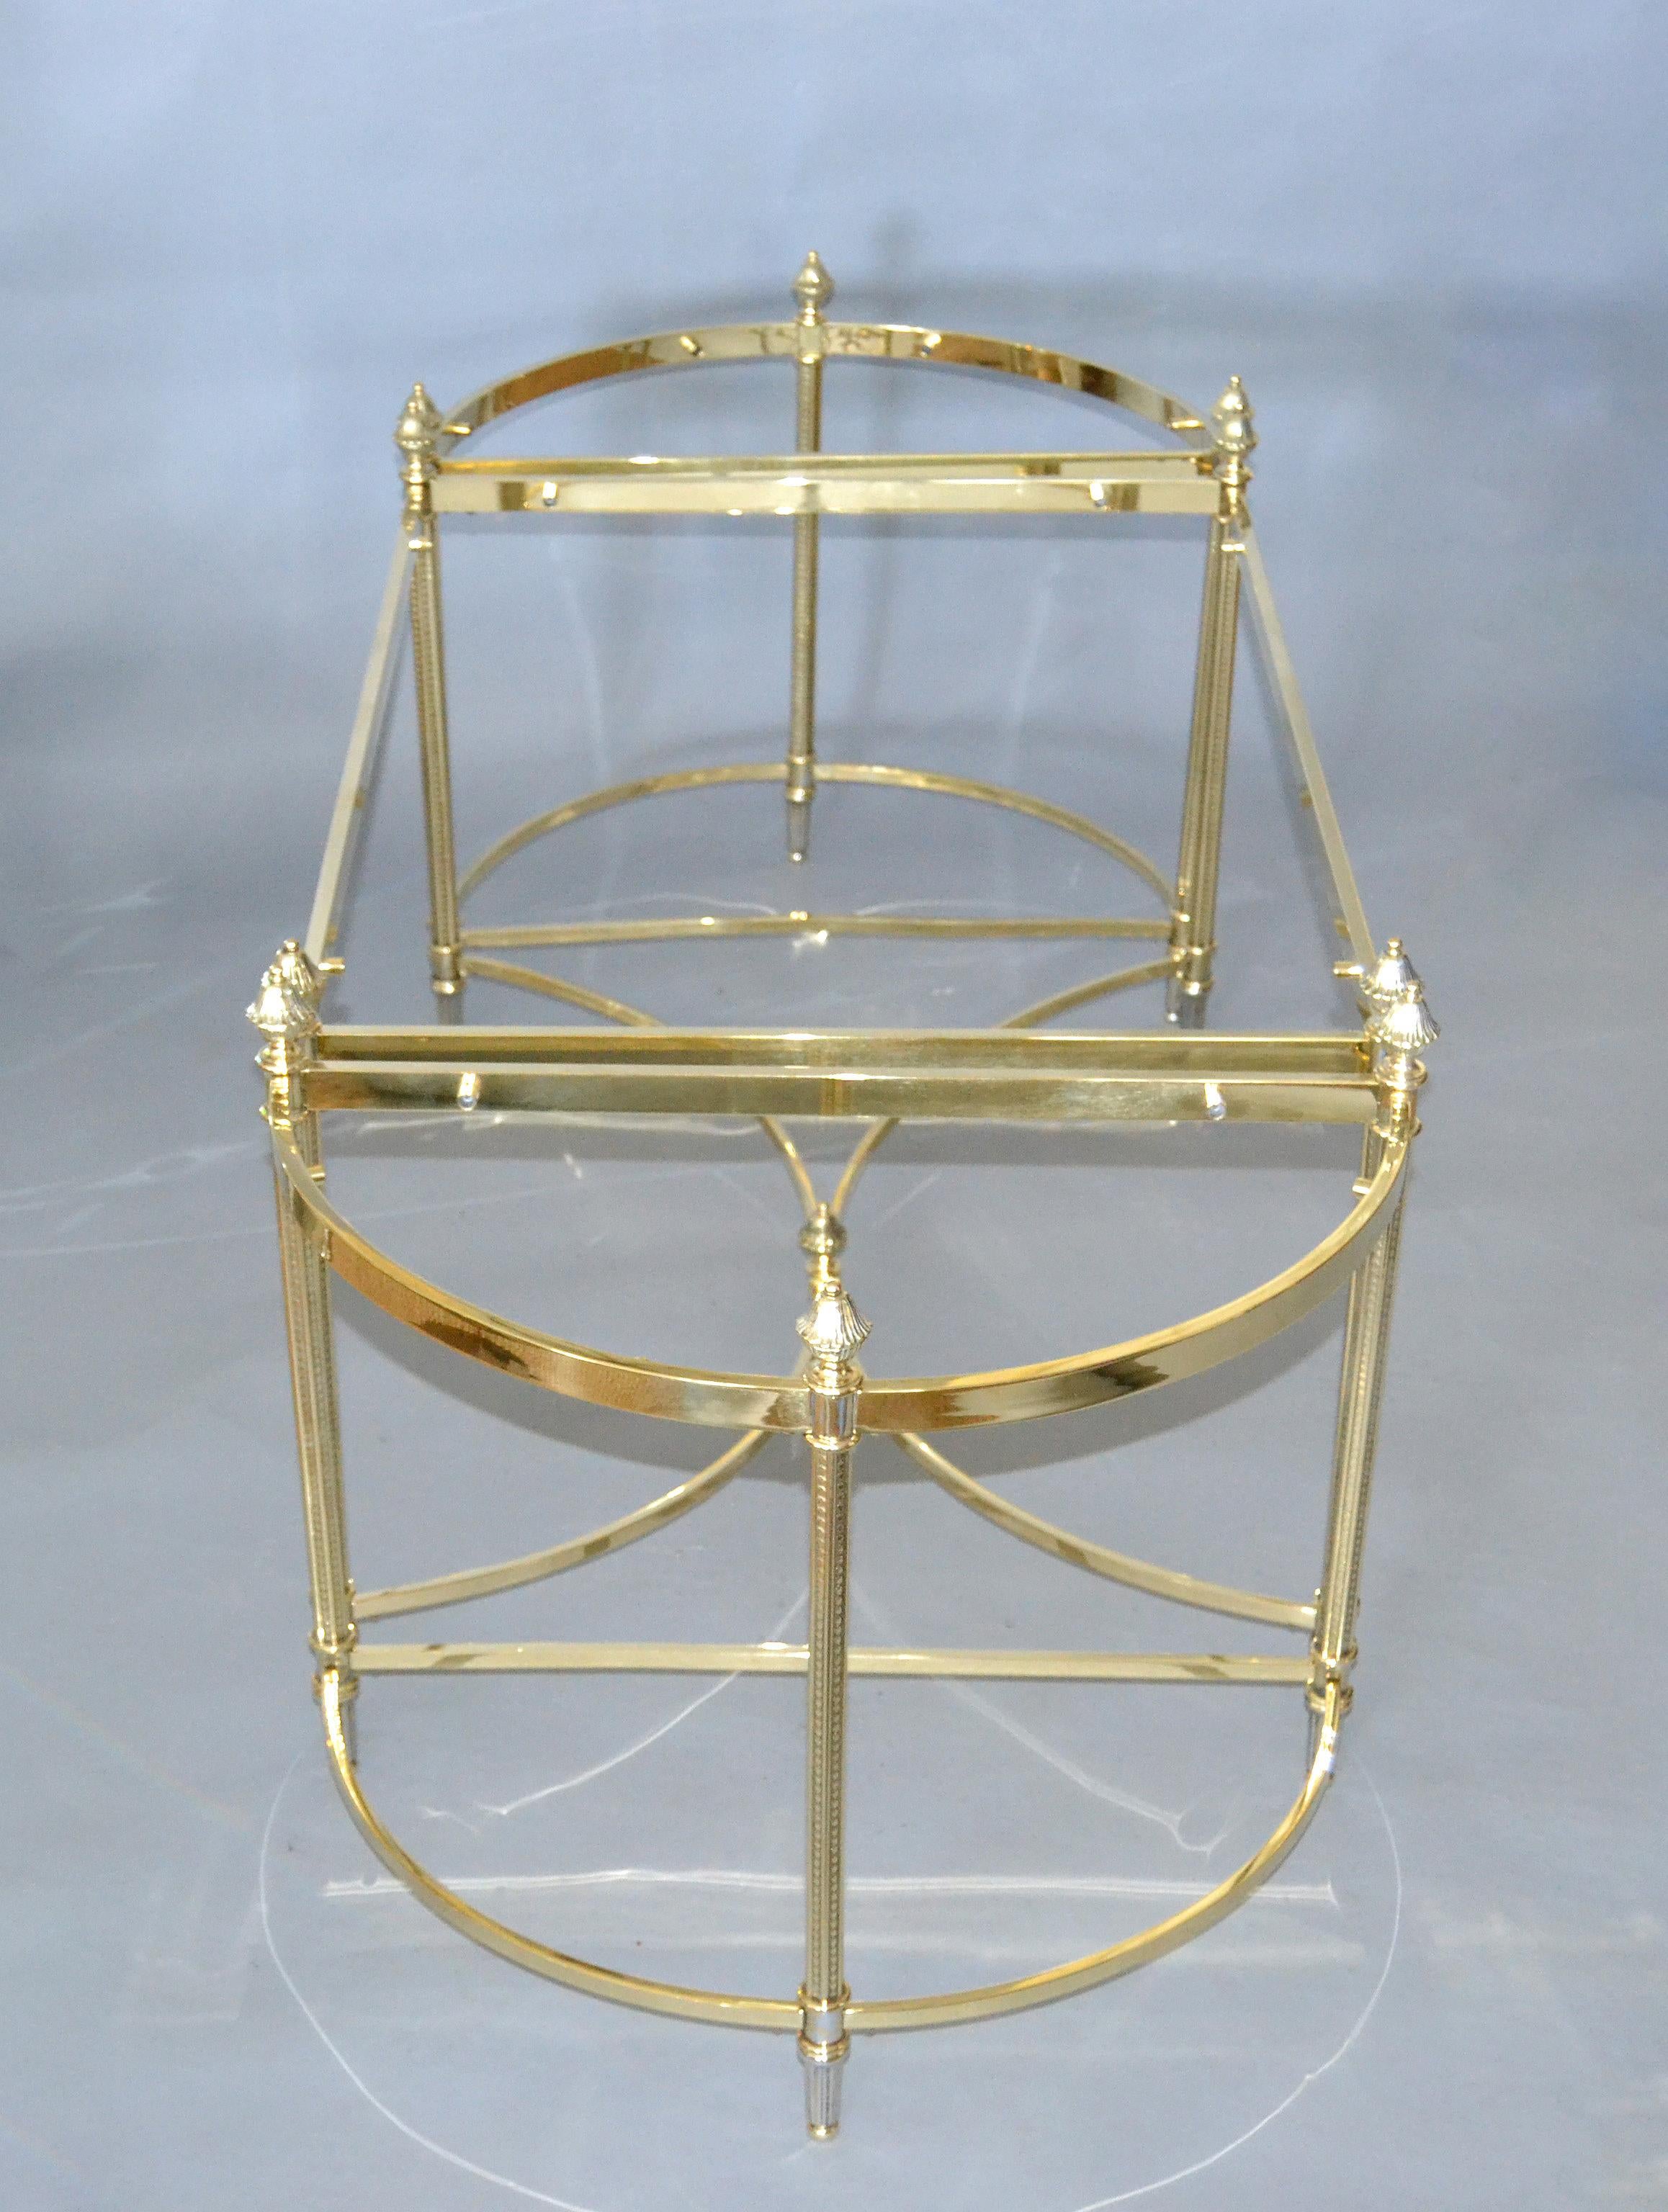 French Maison Jansen / Baguès brass and glass three pieces coffee table, 1950s.
The 3 glass pieces will be customized.
 
Measurements 2 small pieces:
Depth 11.5 inches
Length 22 inches
Height 19 inches.
Measurements rectangular table:
Depth